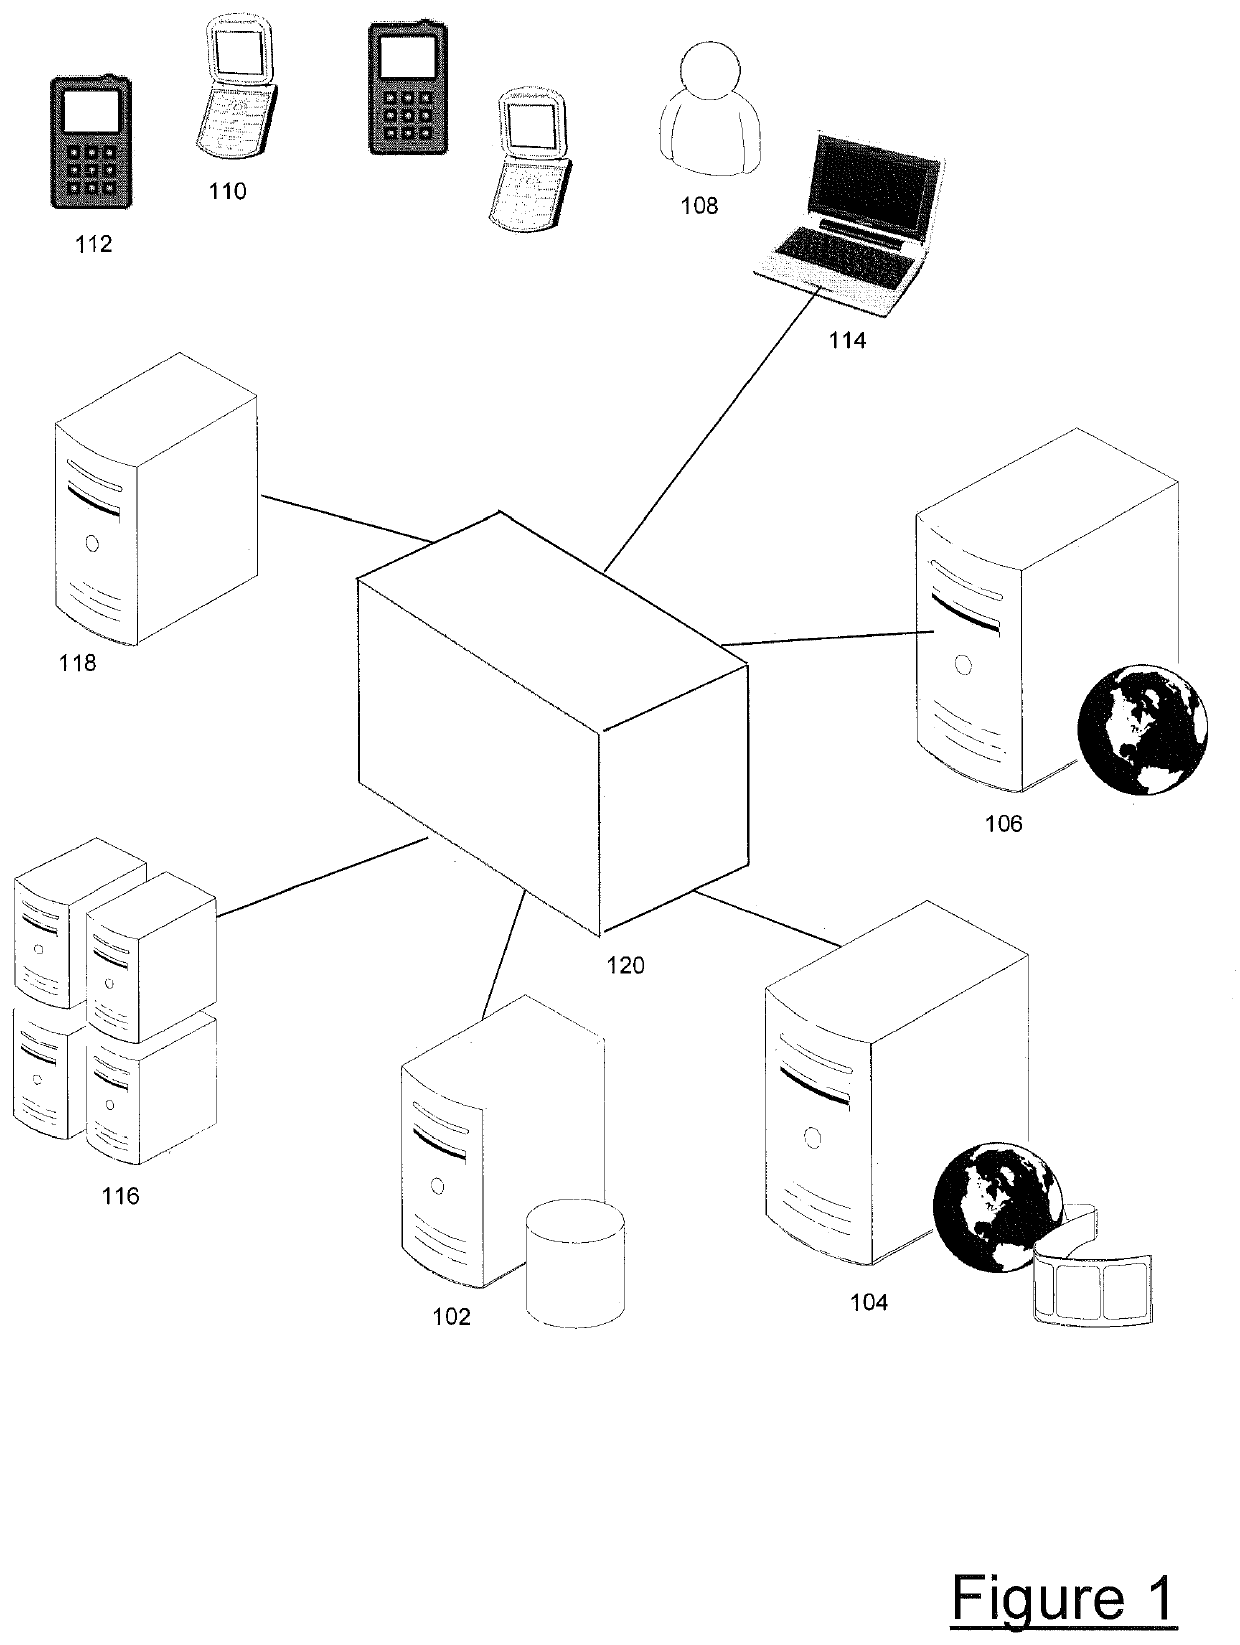 Systems, methods, and devices for securely sharing information using intermediary entity